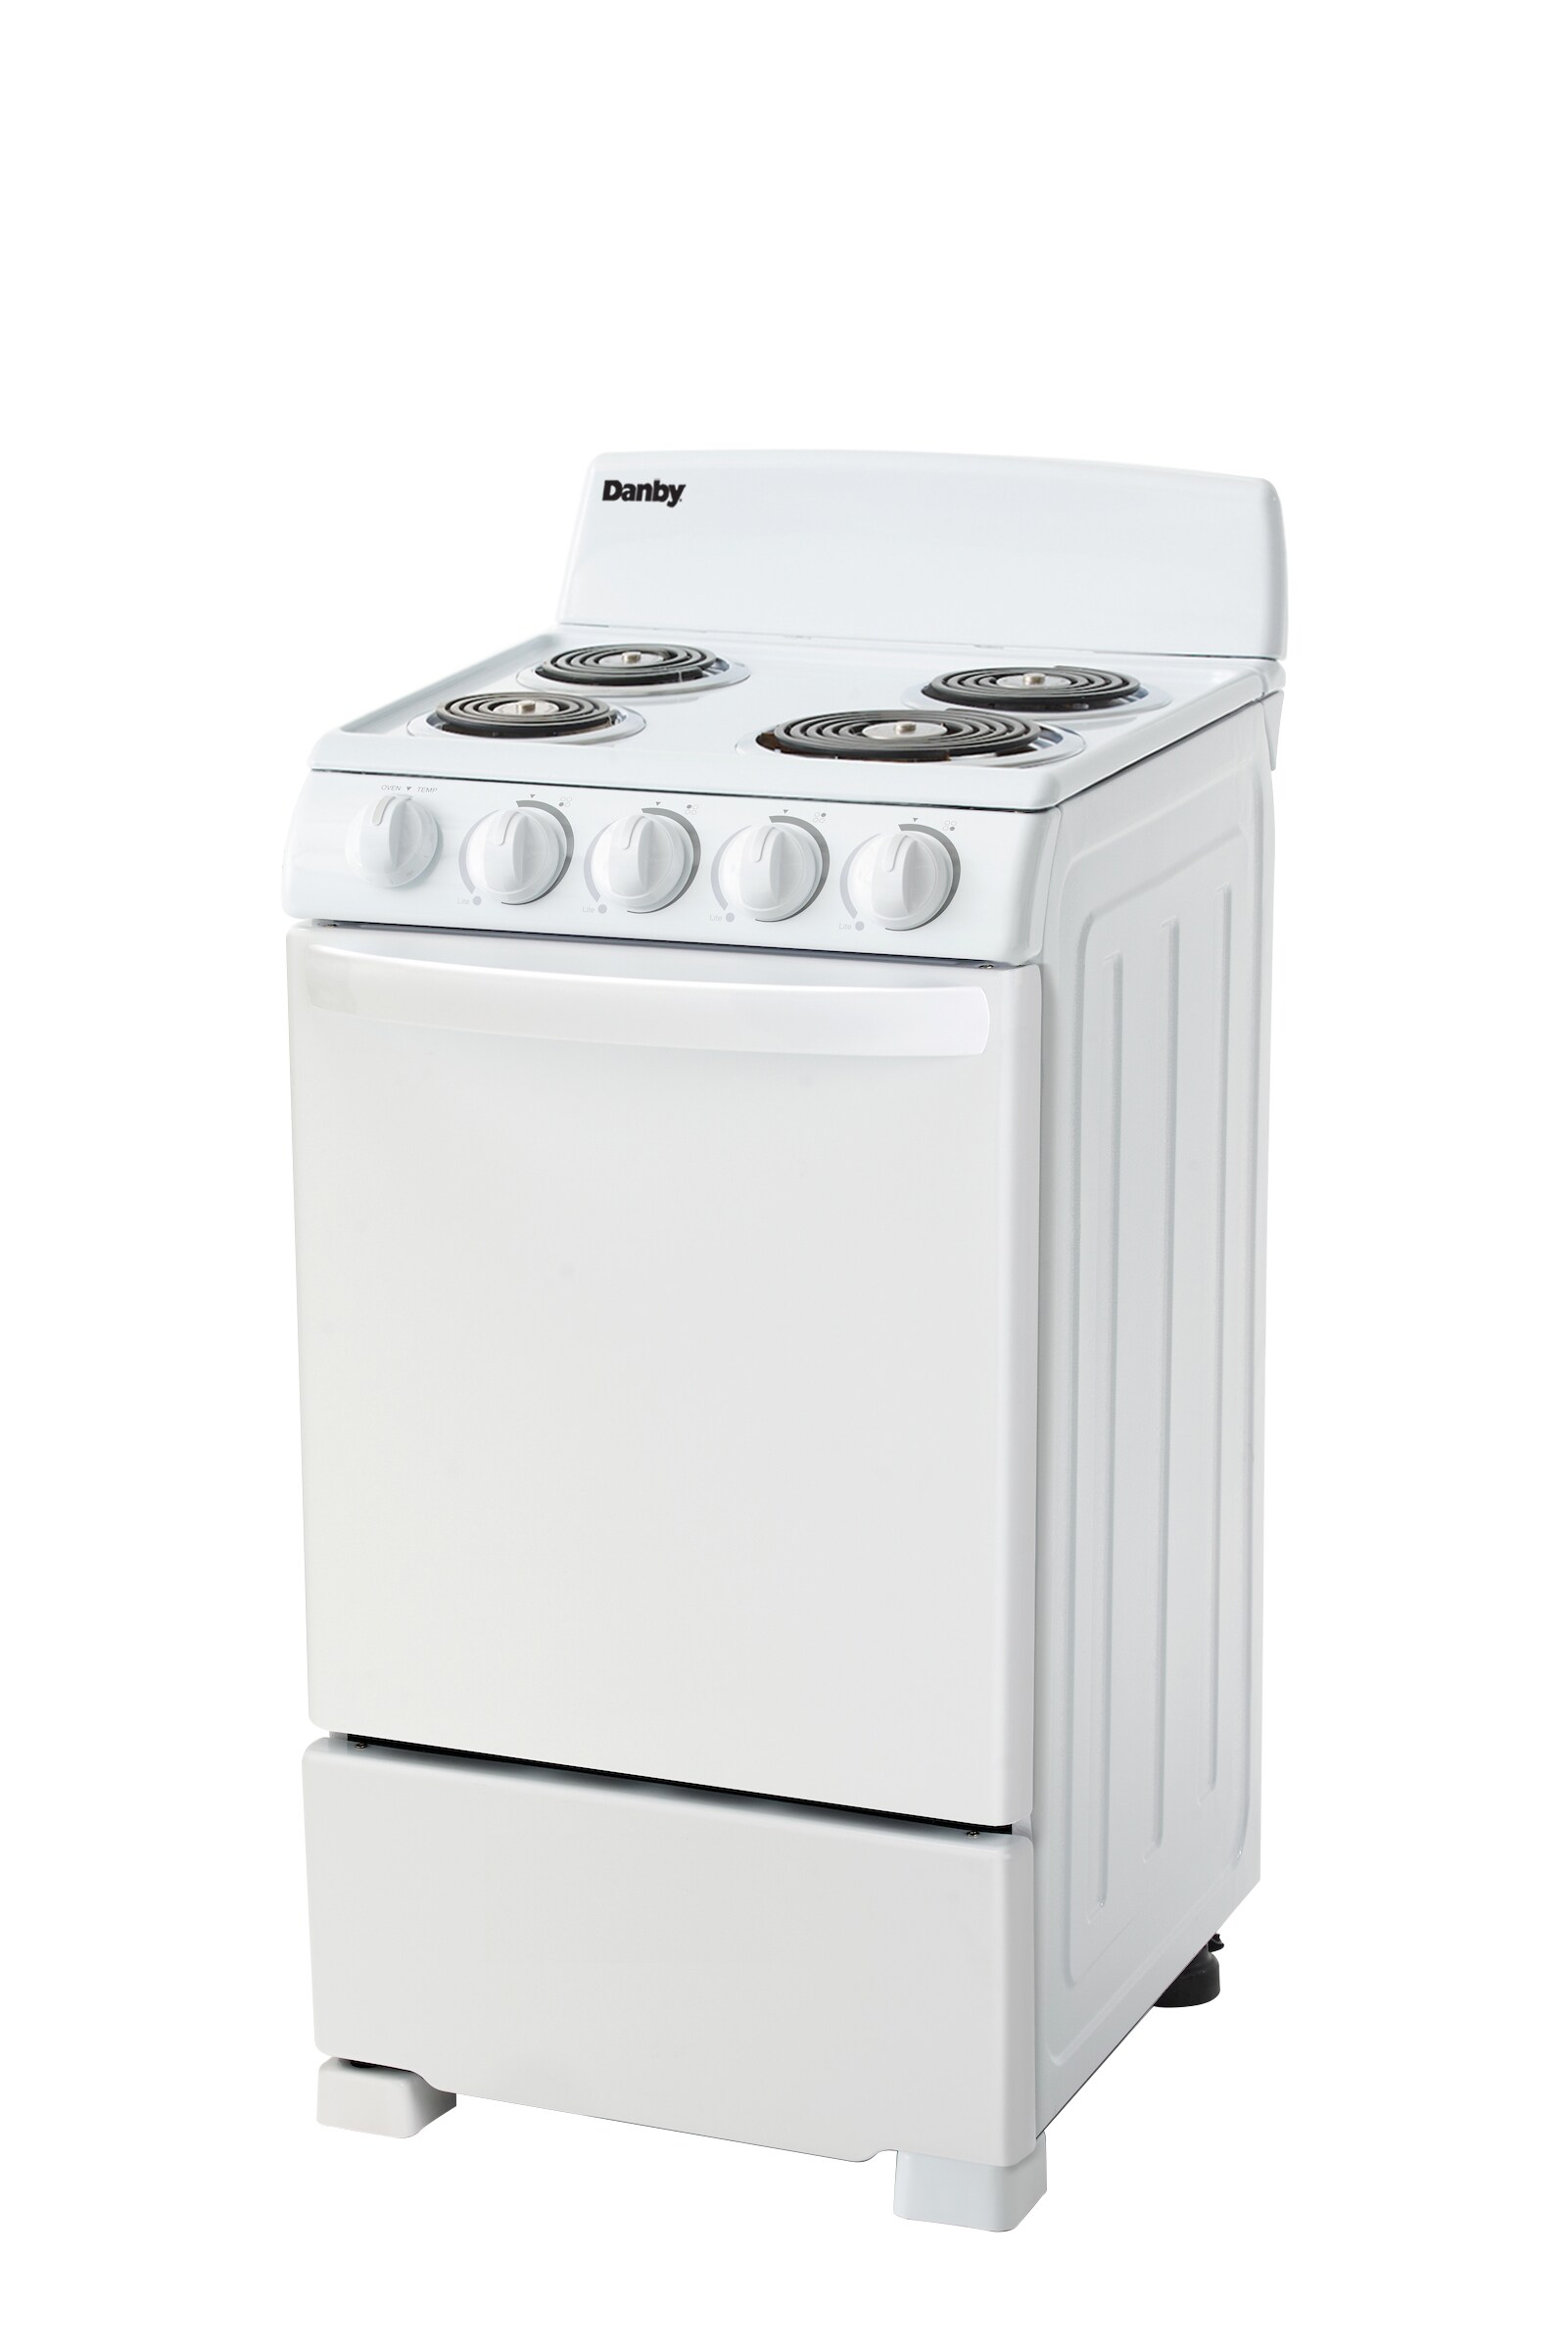 Holiday 20-in 4 Burners 2.4-cu ft Freestanding Electric Range (White)